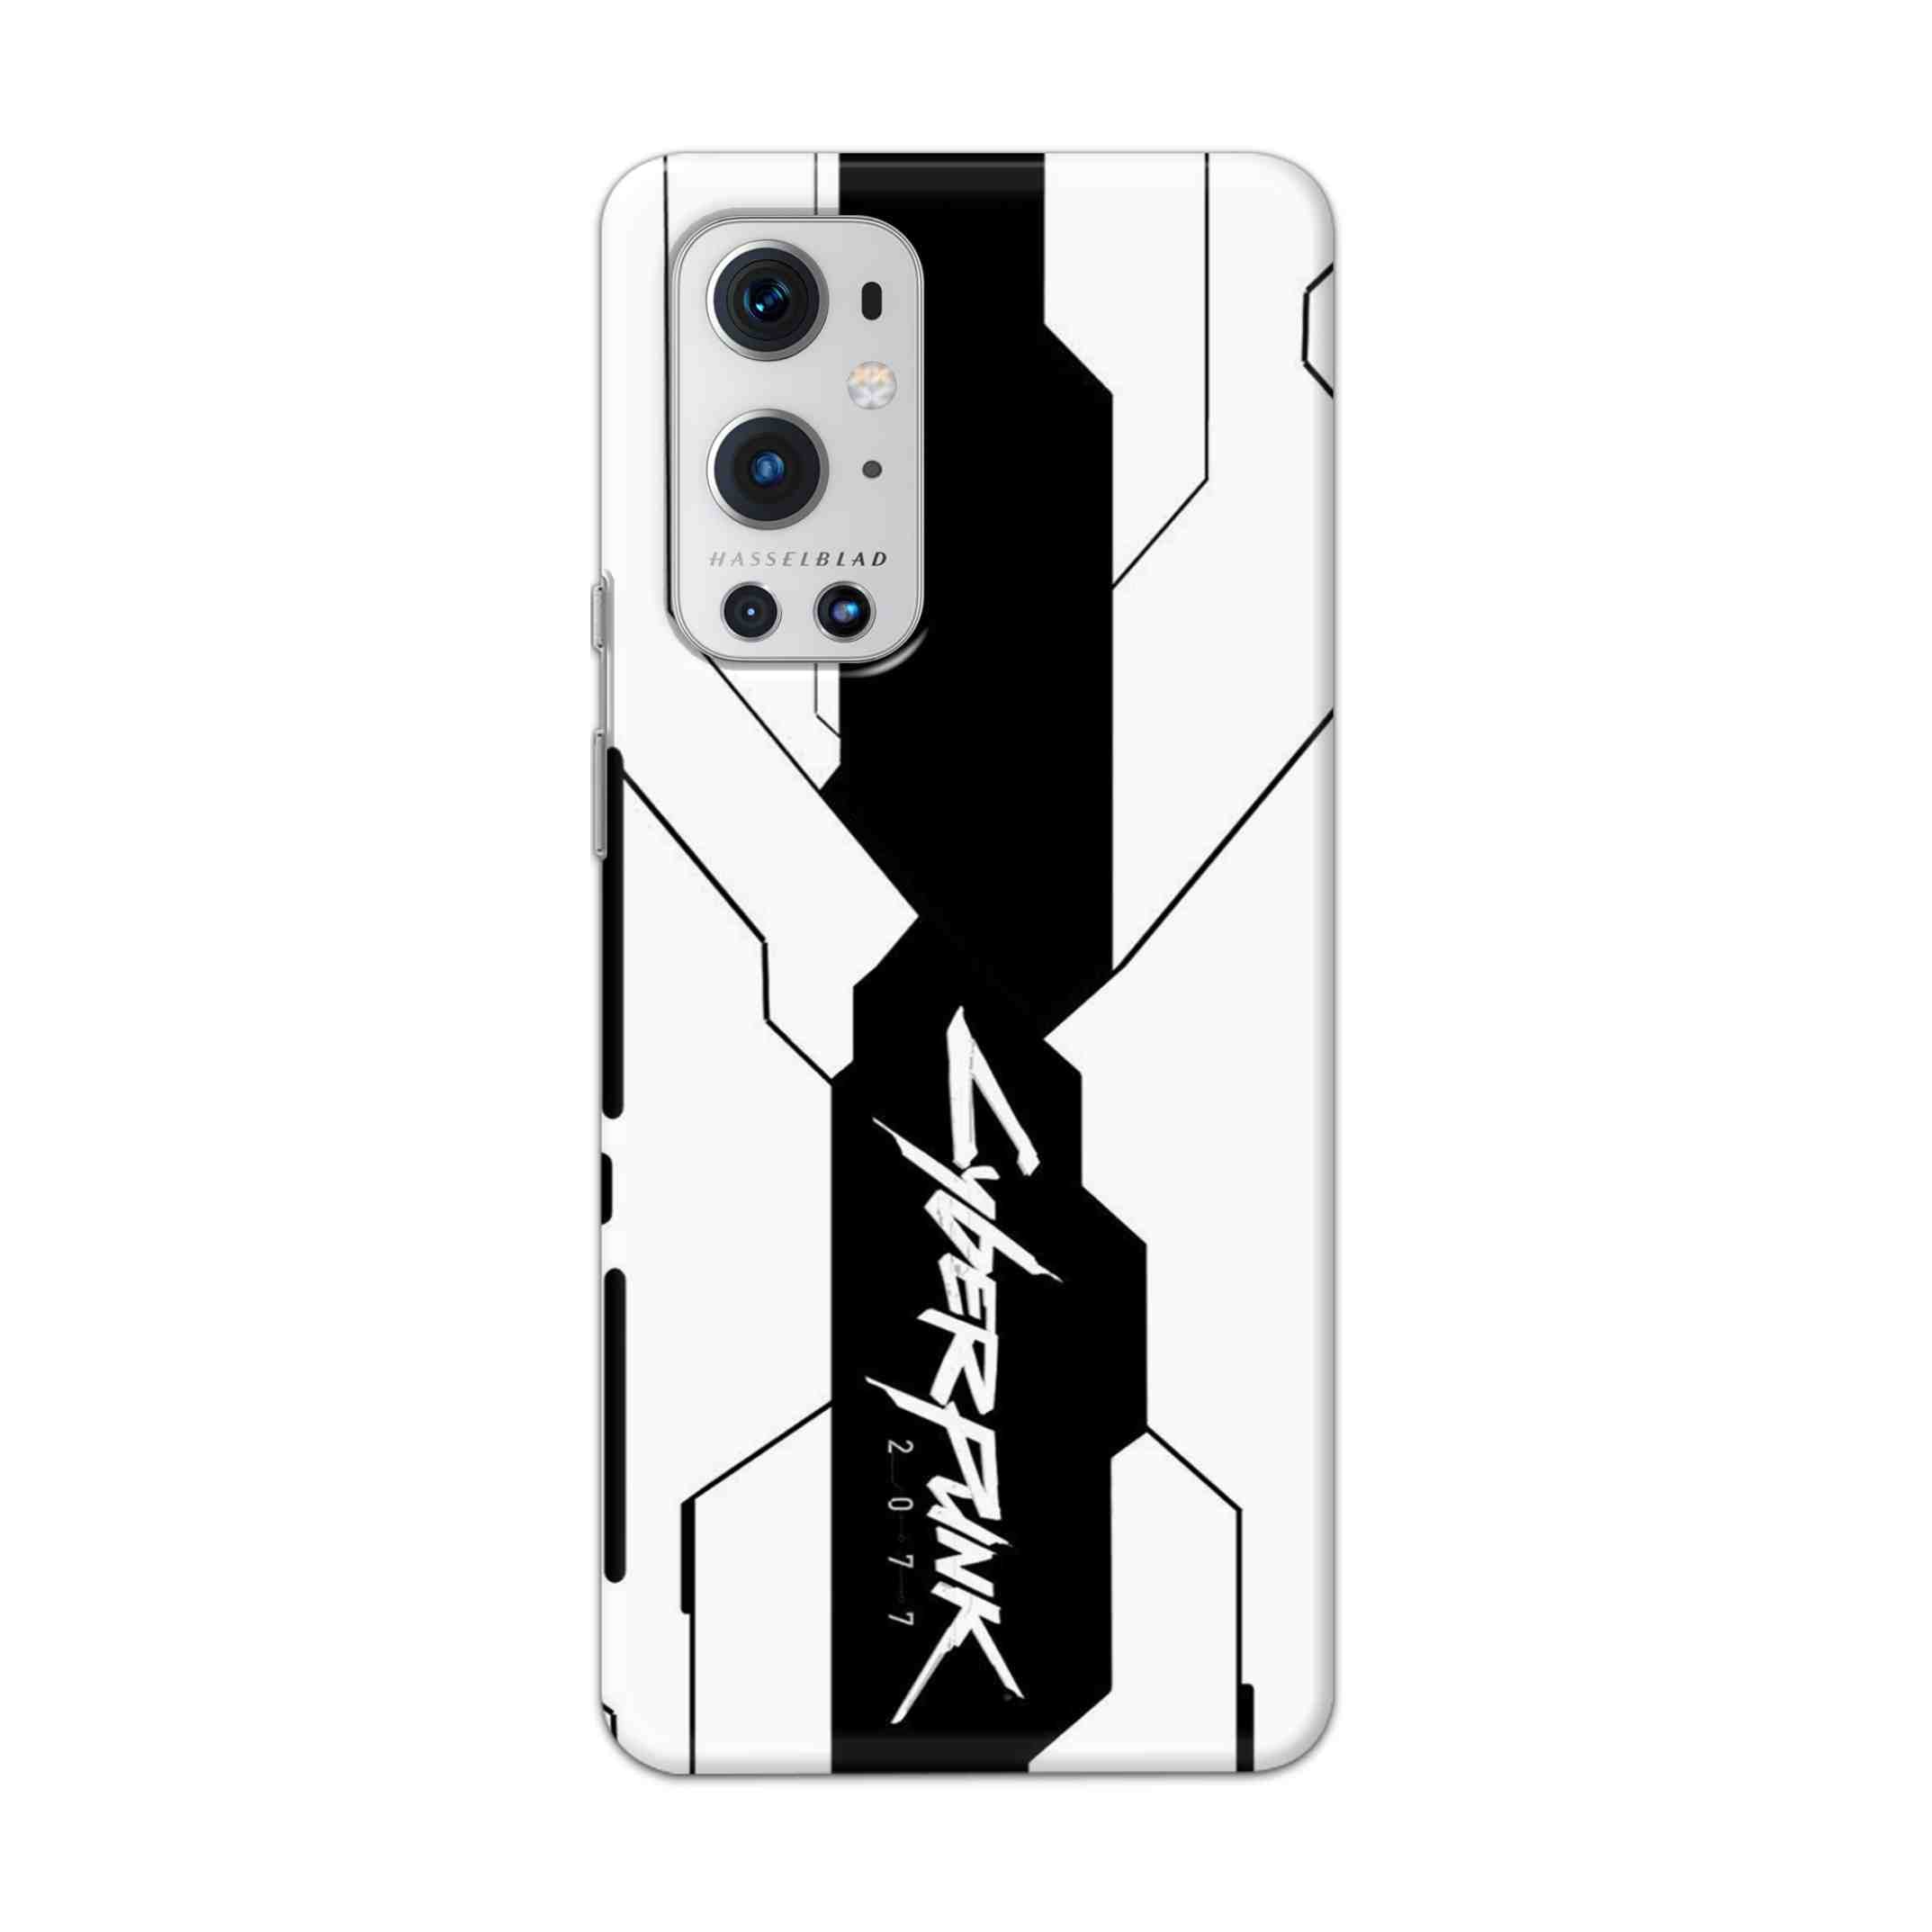 Buy Cyberpunk 2077 Hard Back Mobile Phone Case Cover For OnePlus 9 Pro Online